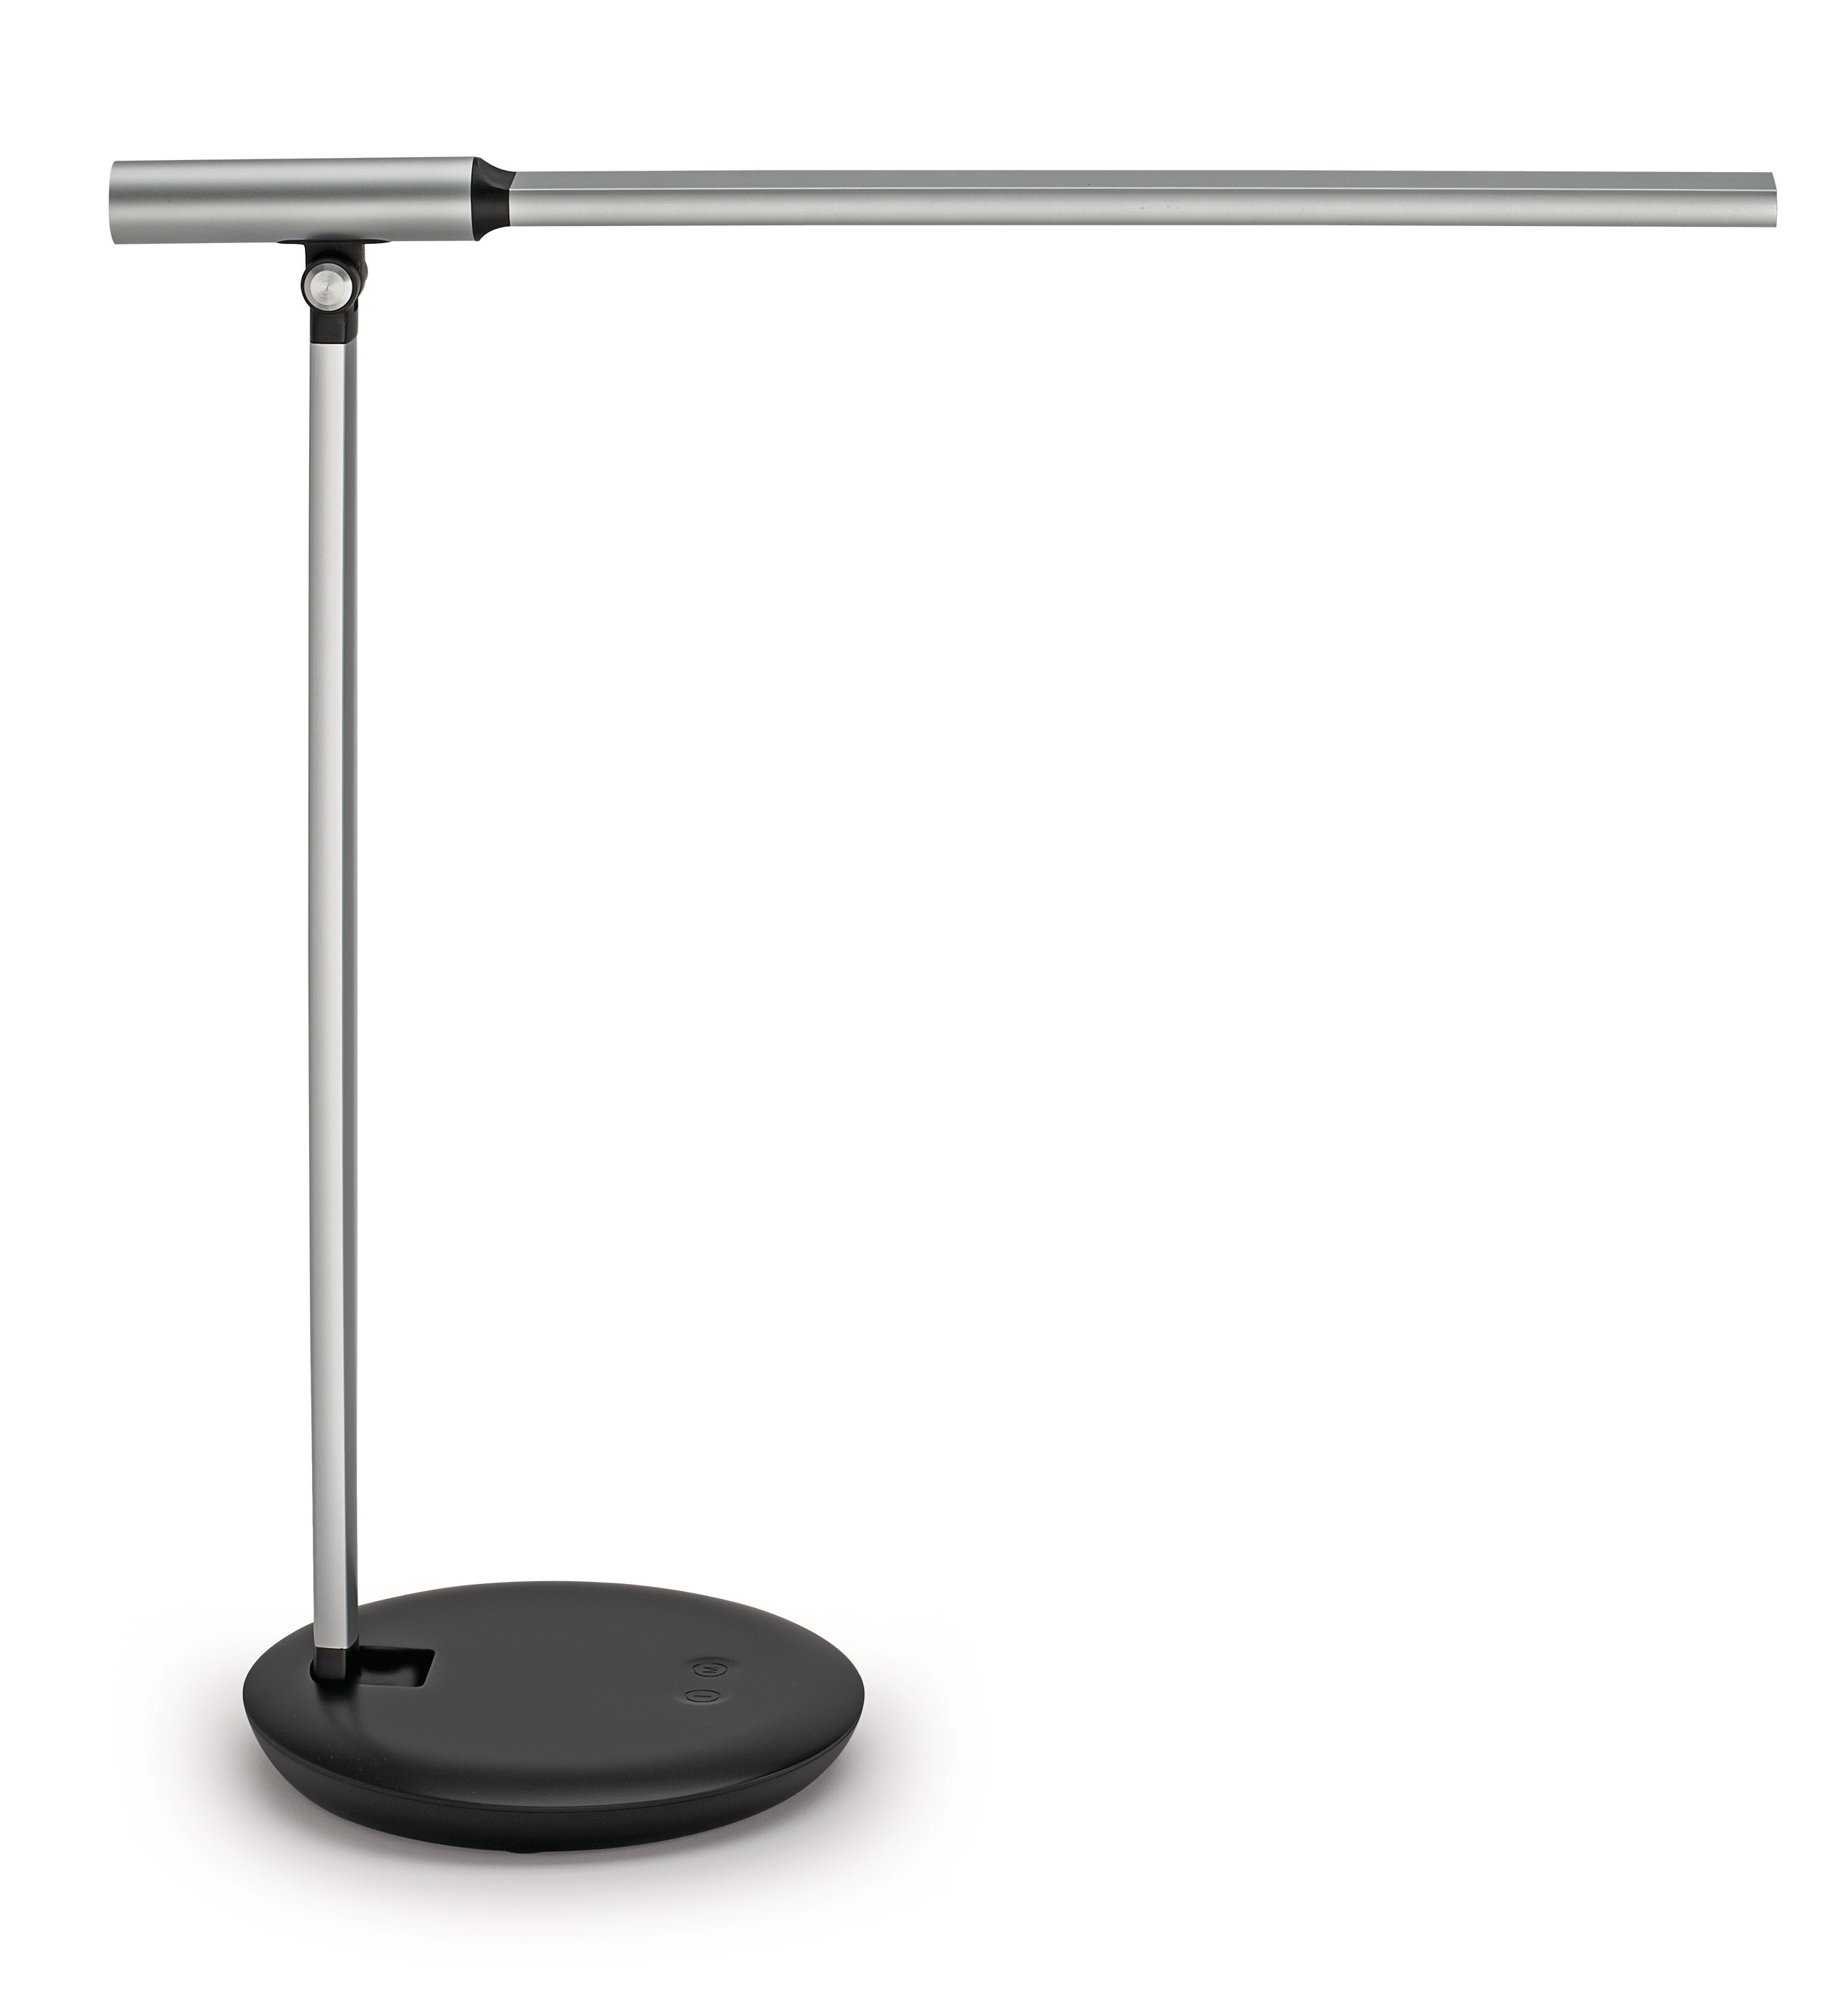 MAUL Lampe de table MAULrubia 8201595 argent, dimmable, USB